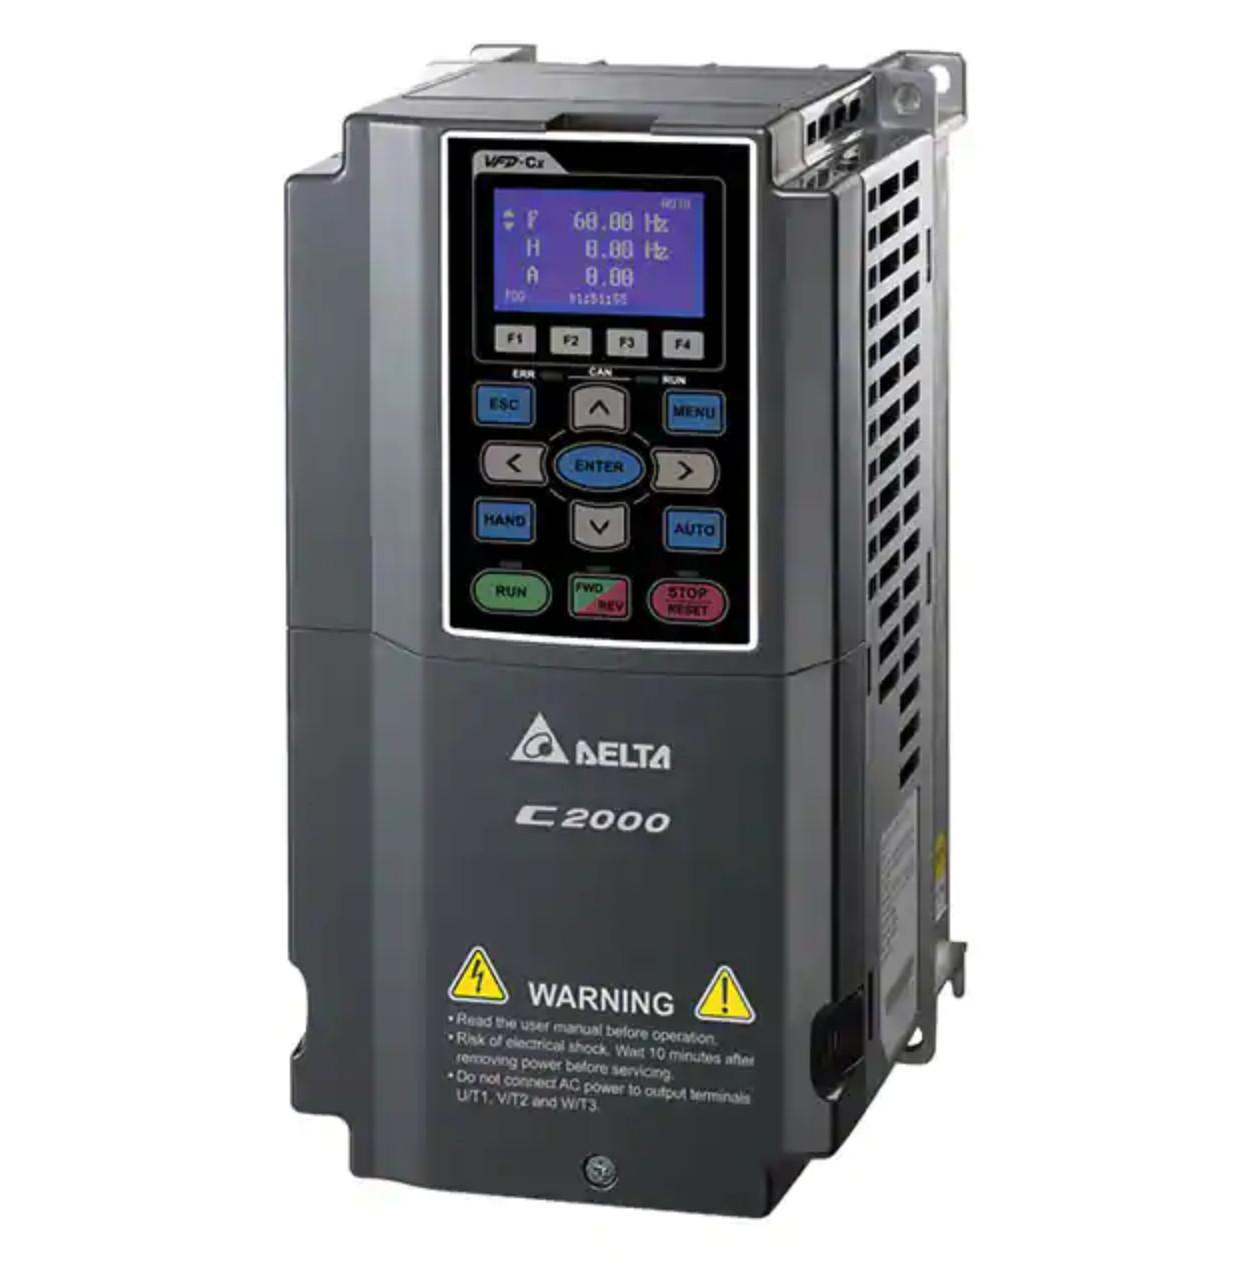 Delta VFD007C23A-21 Variable Frequency Drive, 3 phase, 230 VAC Input, 1 HP, frame A, wall mount, IP20, NEMA 1